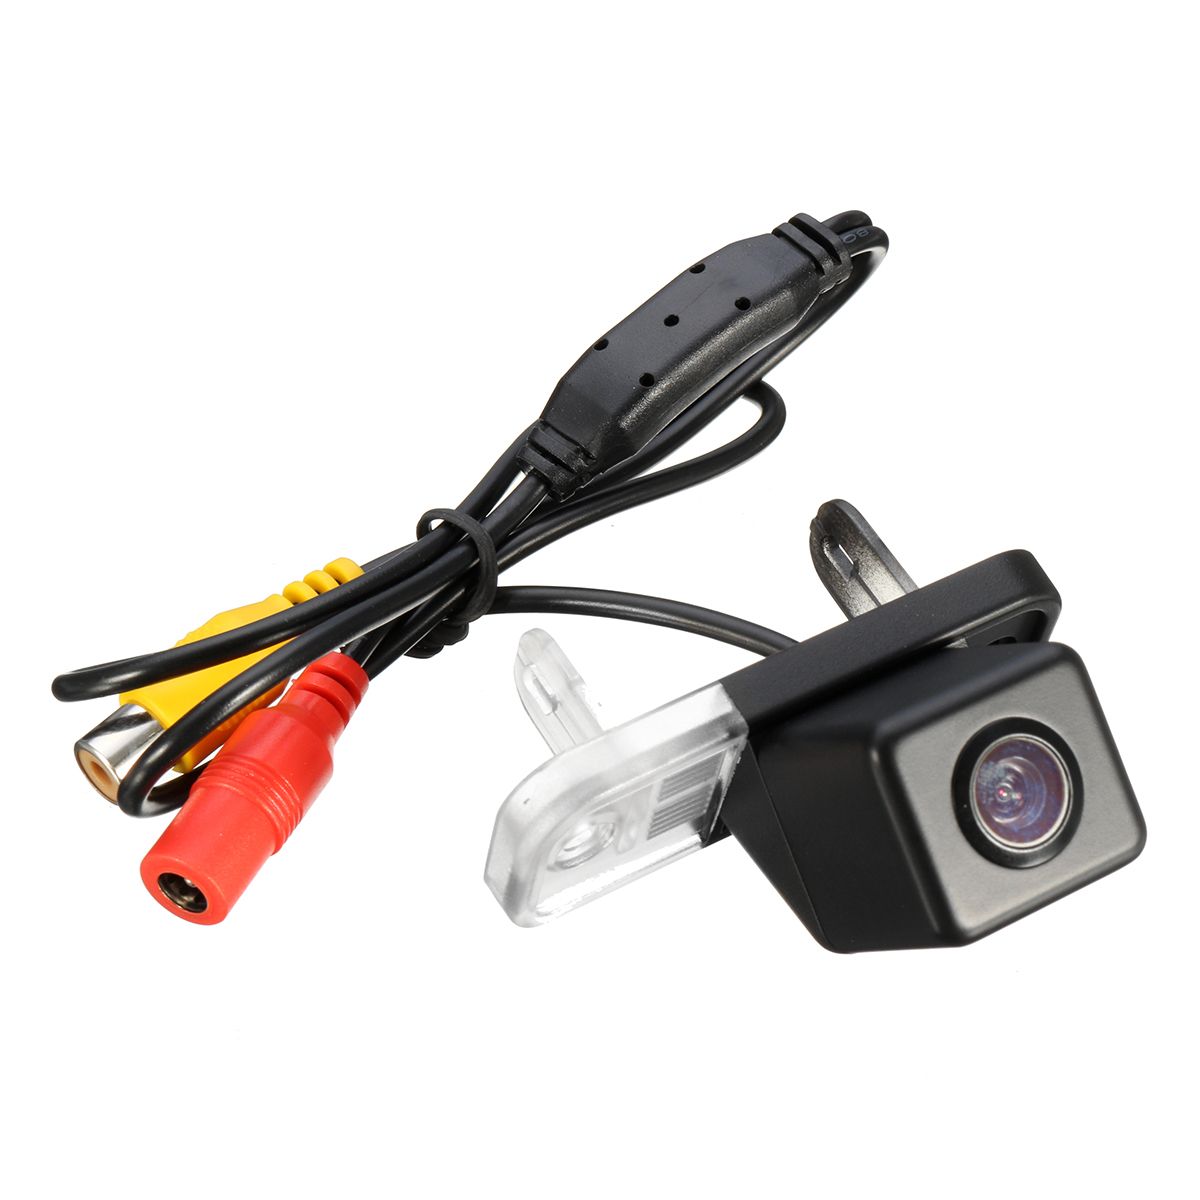 CCD-Car-Rear-View-Camera-For-Mercedes-C-Class-W203-W211-CLS-W219-1148135